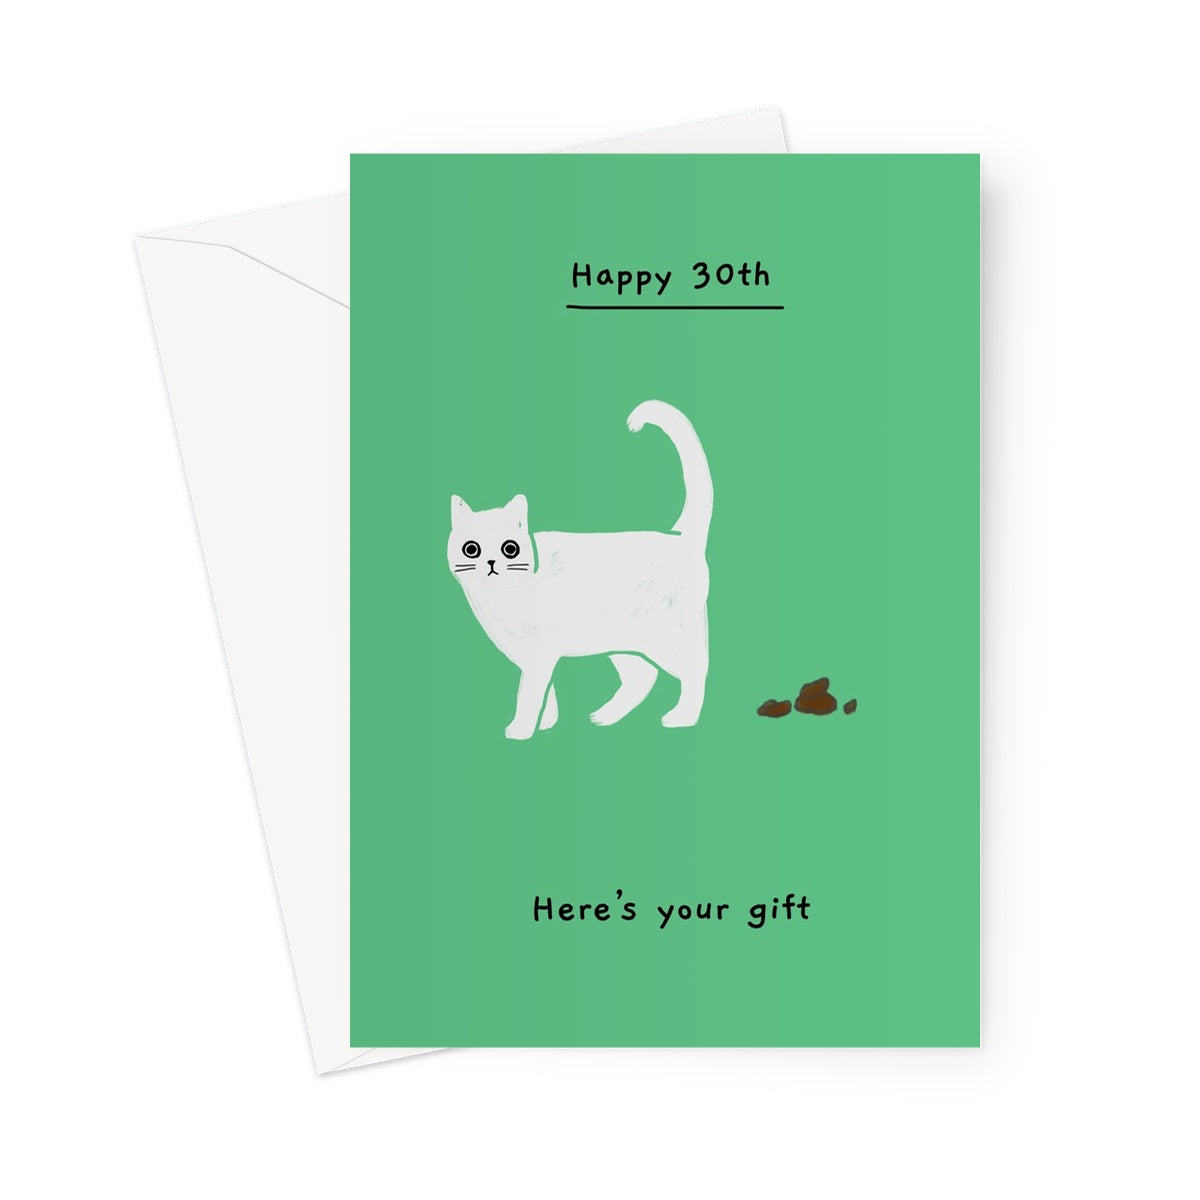 Ken the cat funny 30th birthday card in green - here's your gift